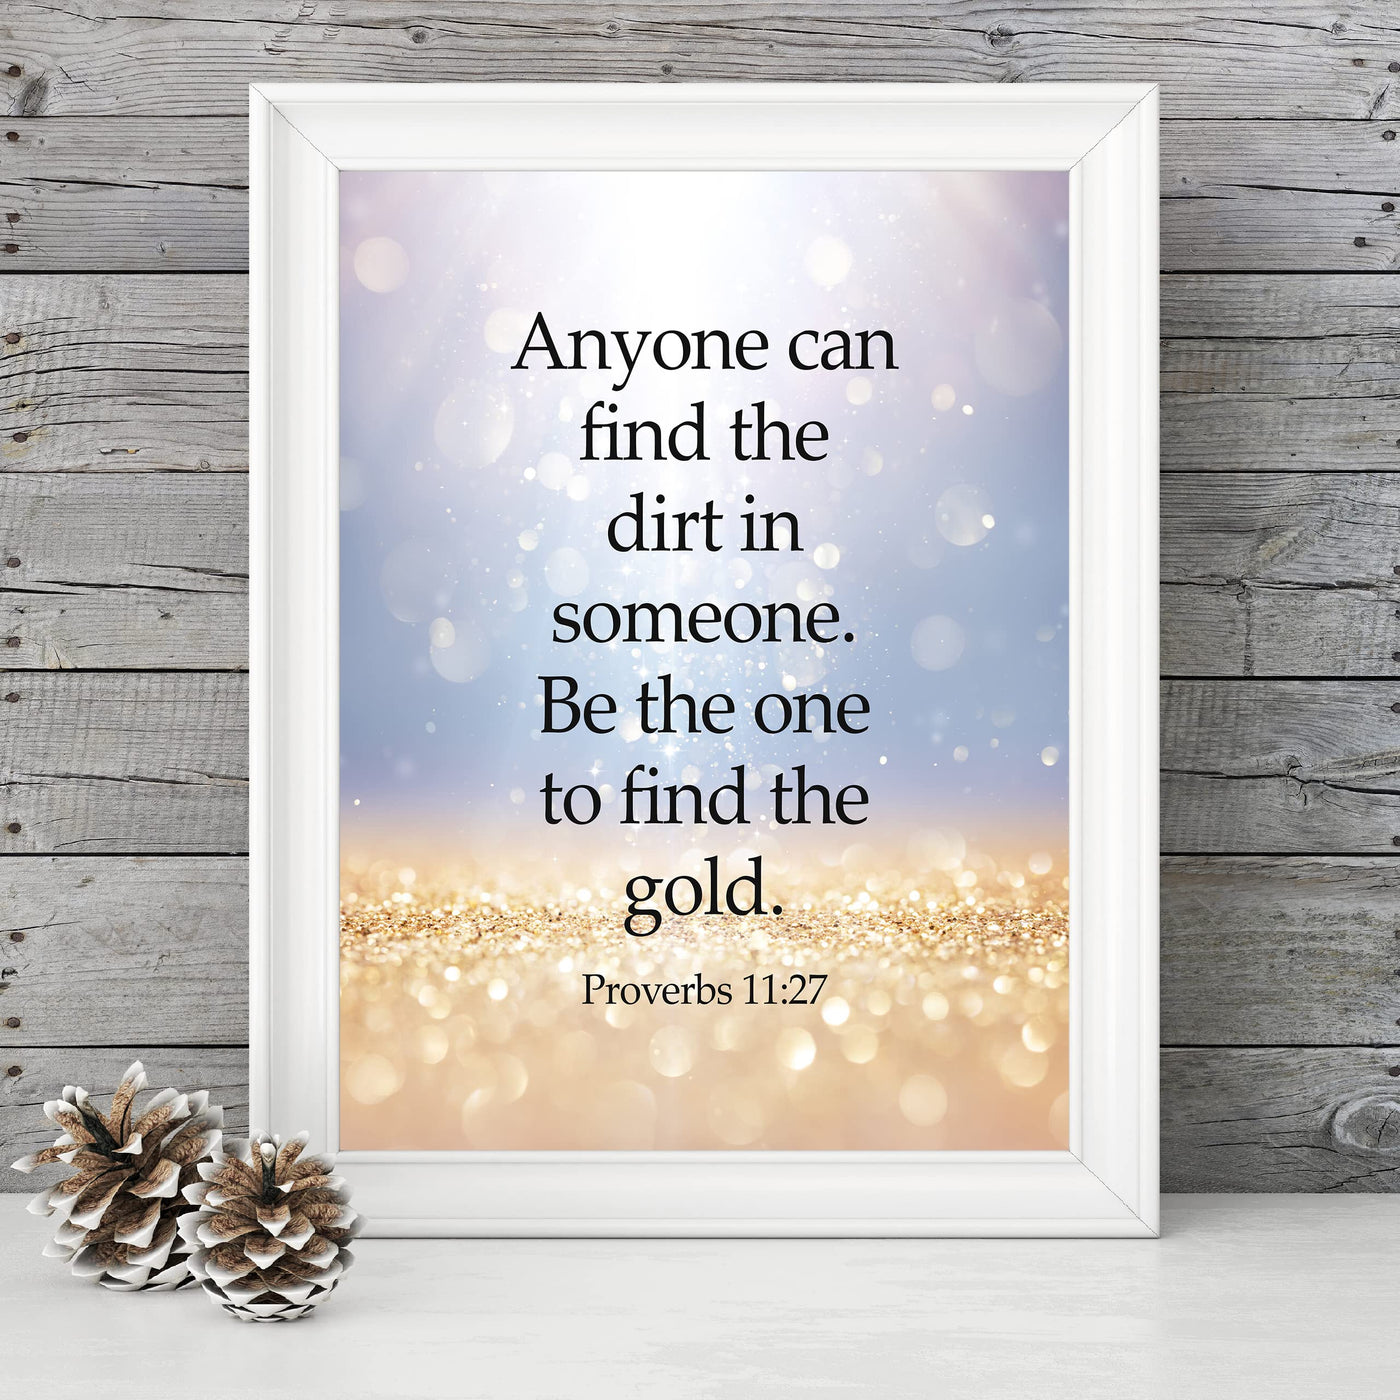 Be the One to Find the Gold in Someone Bible Verse Wall Art -8 x 10" Glitter Design Scripture Print-Ready to Frame. Home-Office-Church-Classroom Decor. Great Christian Gift of Faith! Proverbs 11:27